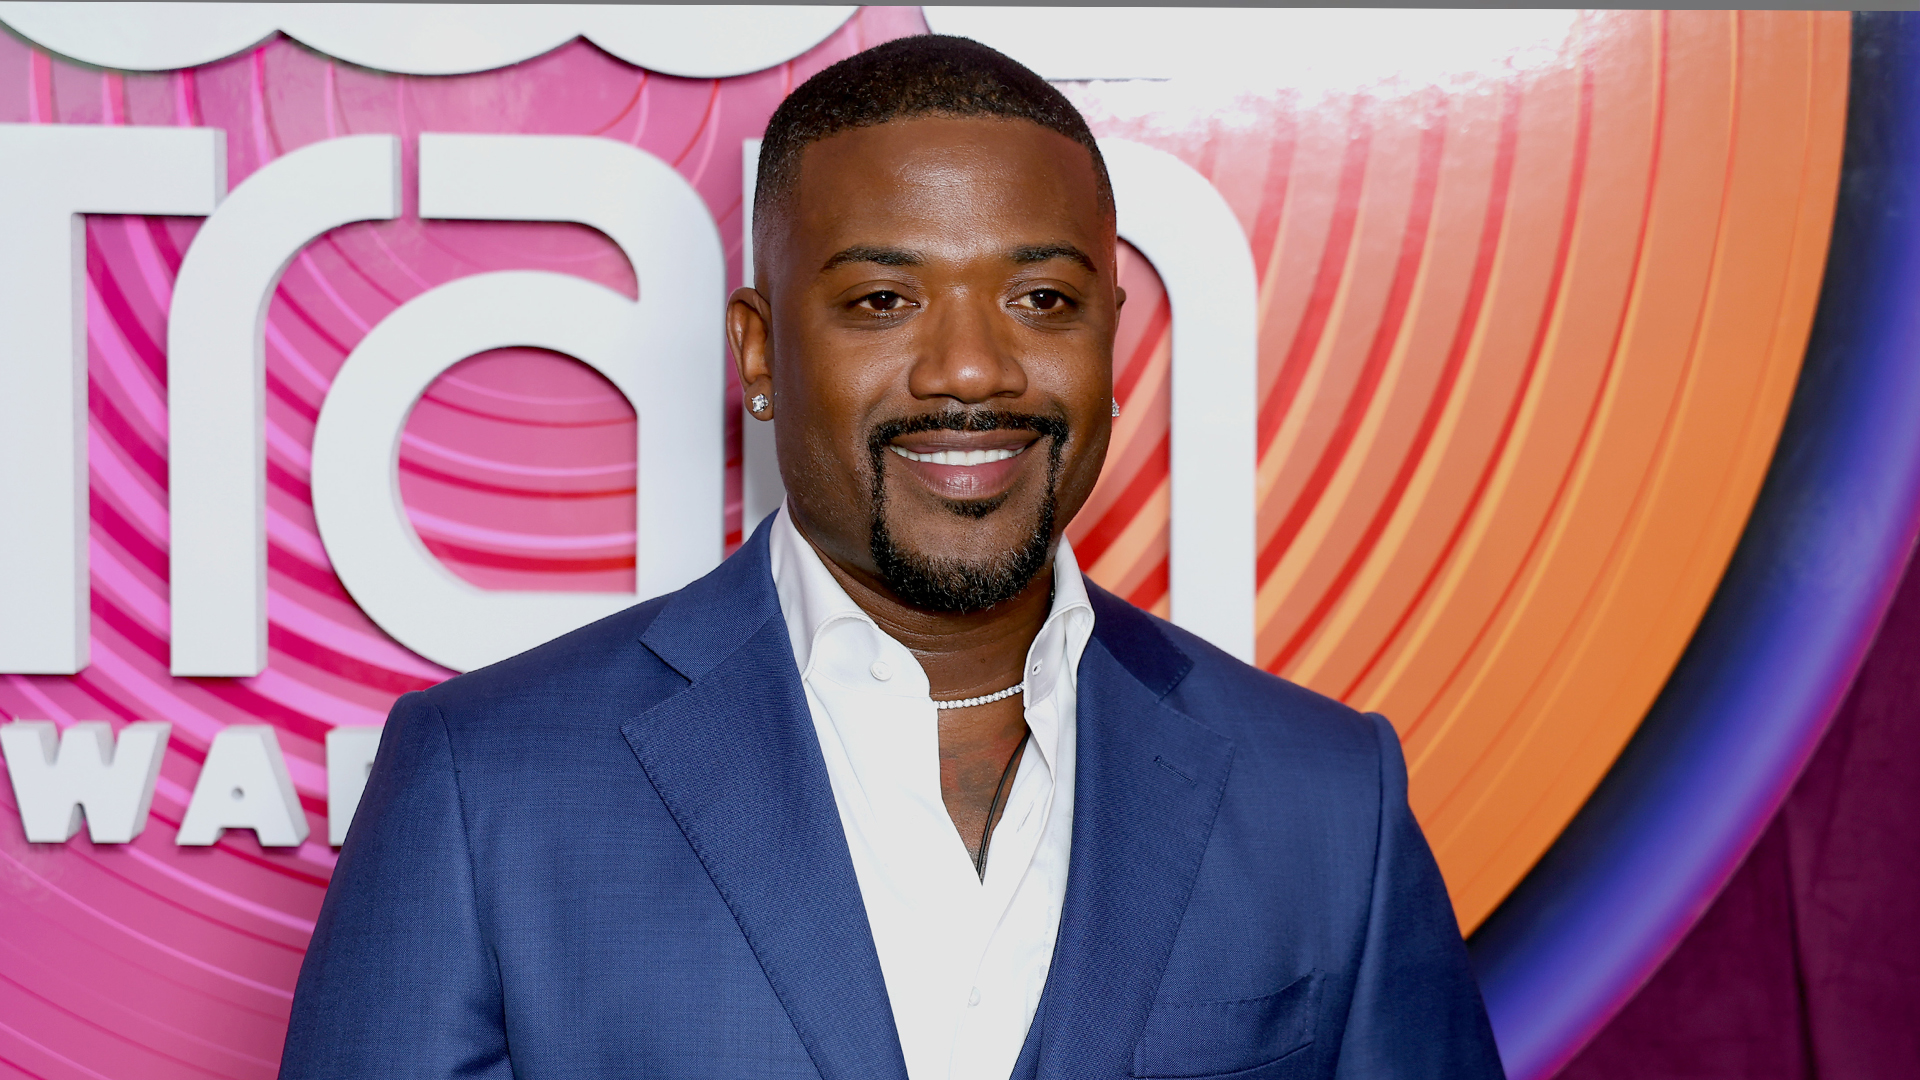 Ray J Describes The Sale Of His ‘Scoot-E’ Brand In 2019 As A ‘Blessing’ — ‘We Were Starting To Look A Little Negative In The Future’